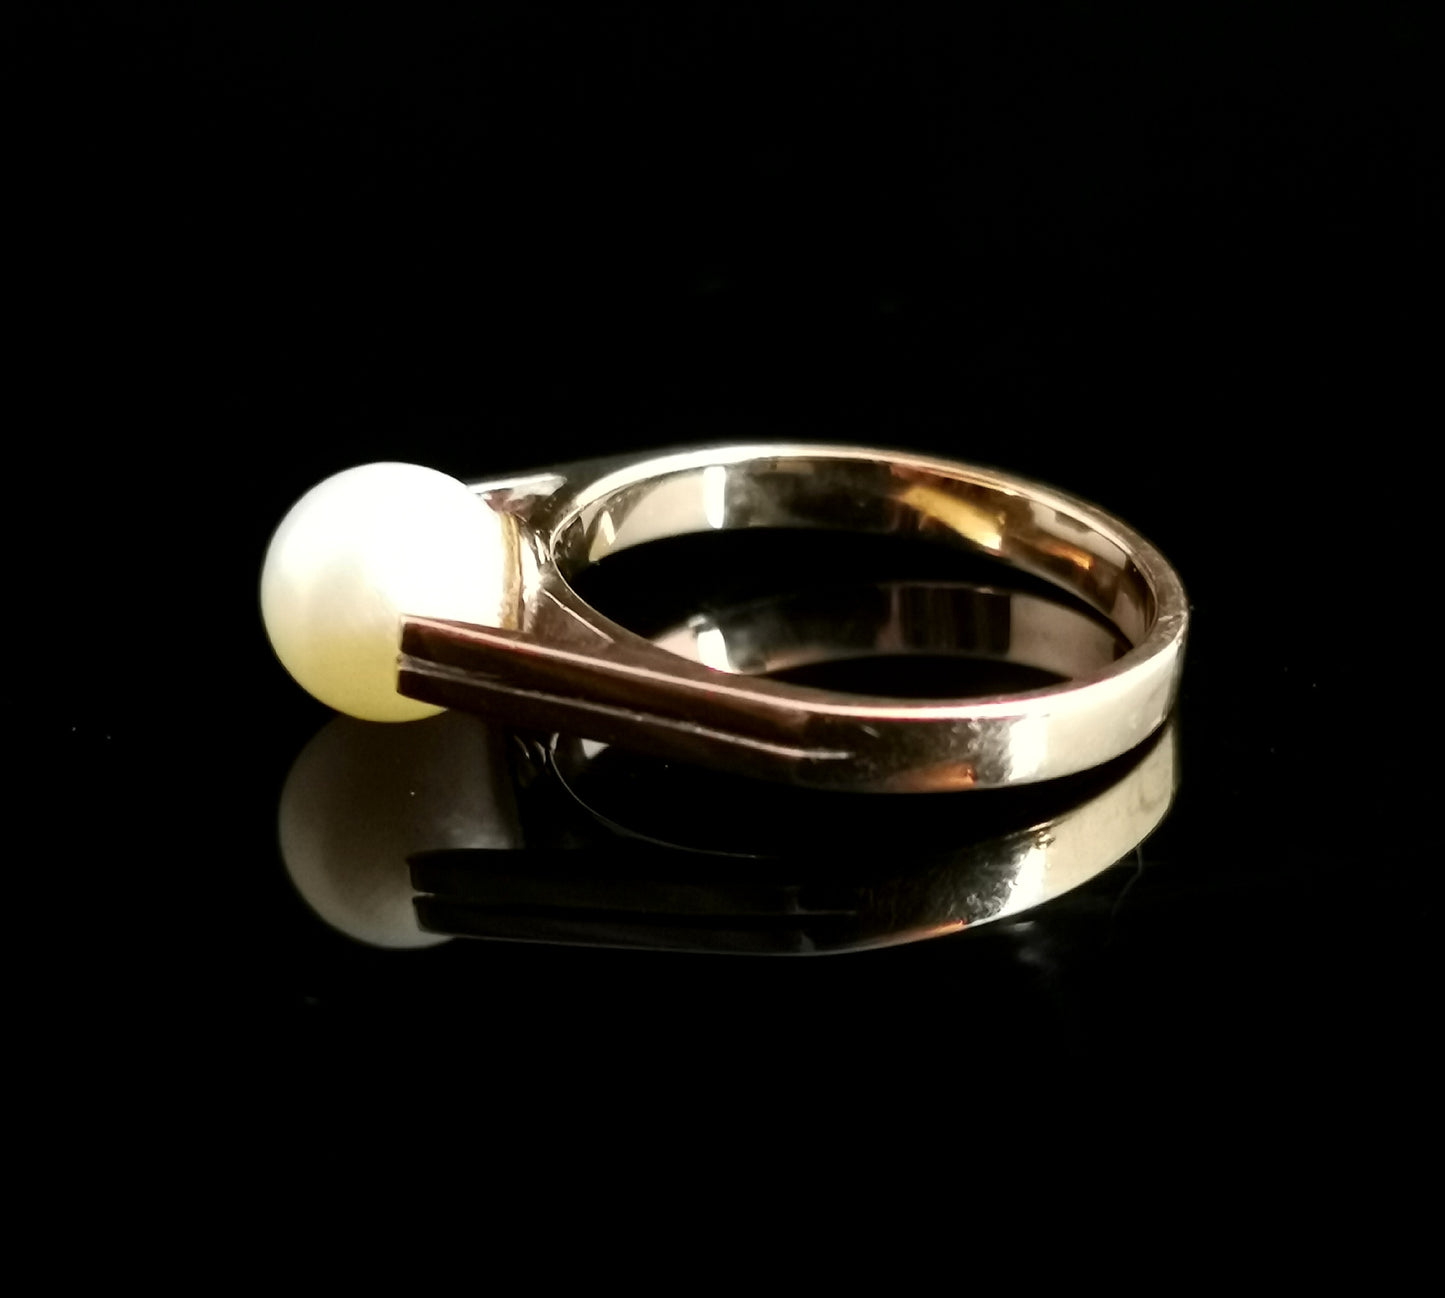 Vintage pearl solitaire ring, 9ct gold, c1940s